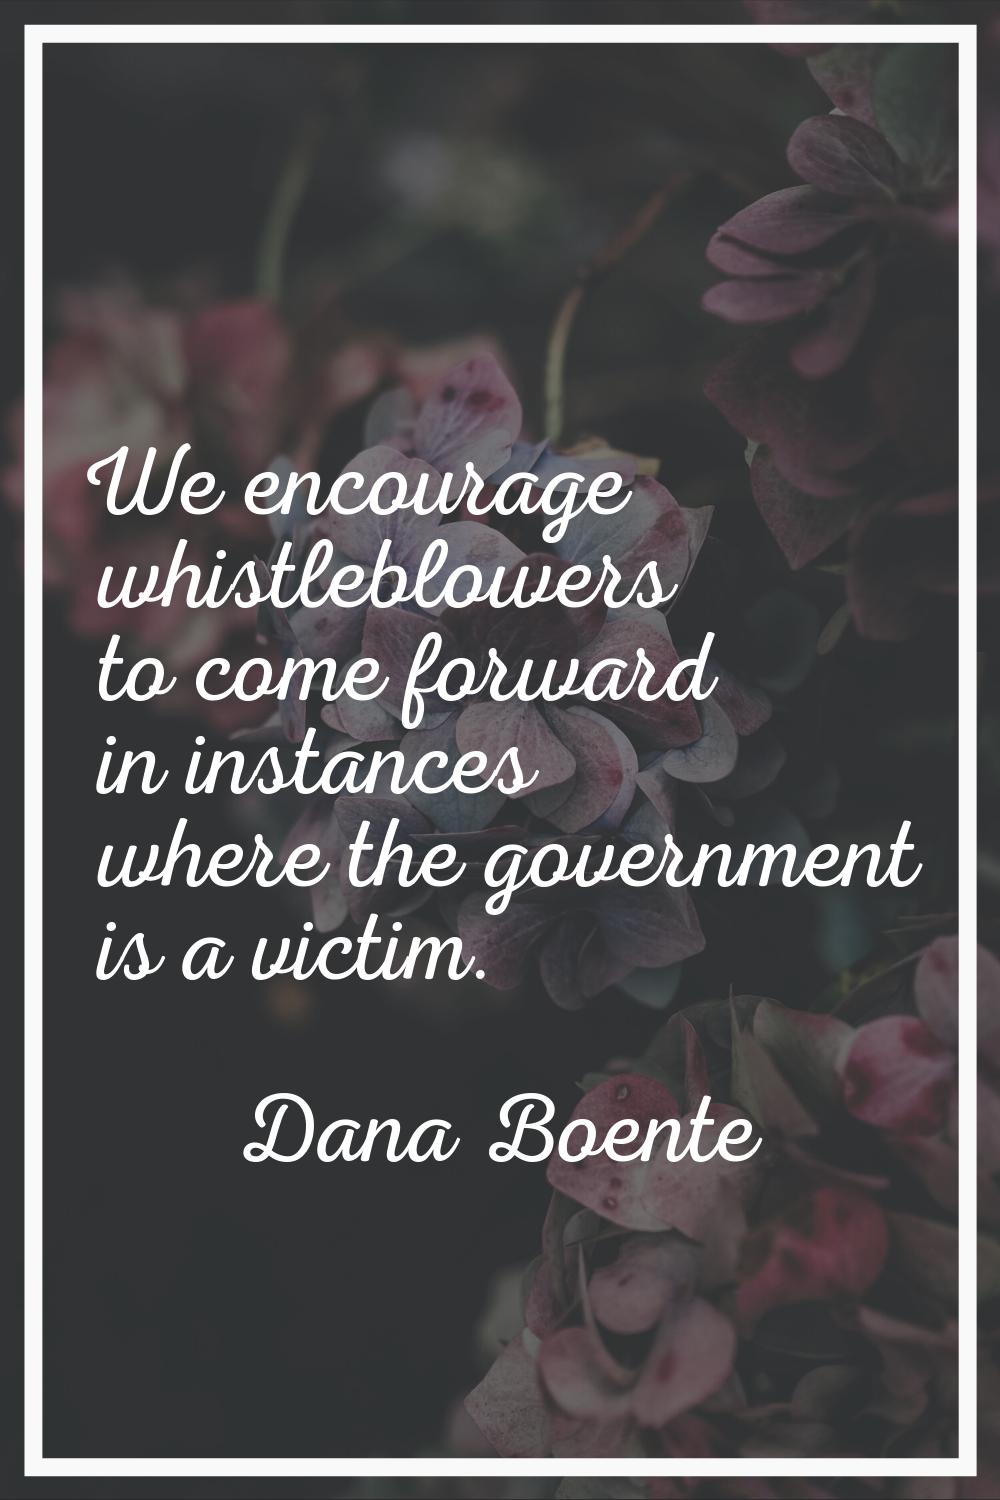 We encourage whistleblowers to come forward in instances where the government is a victim.